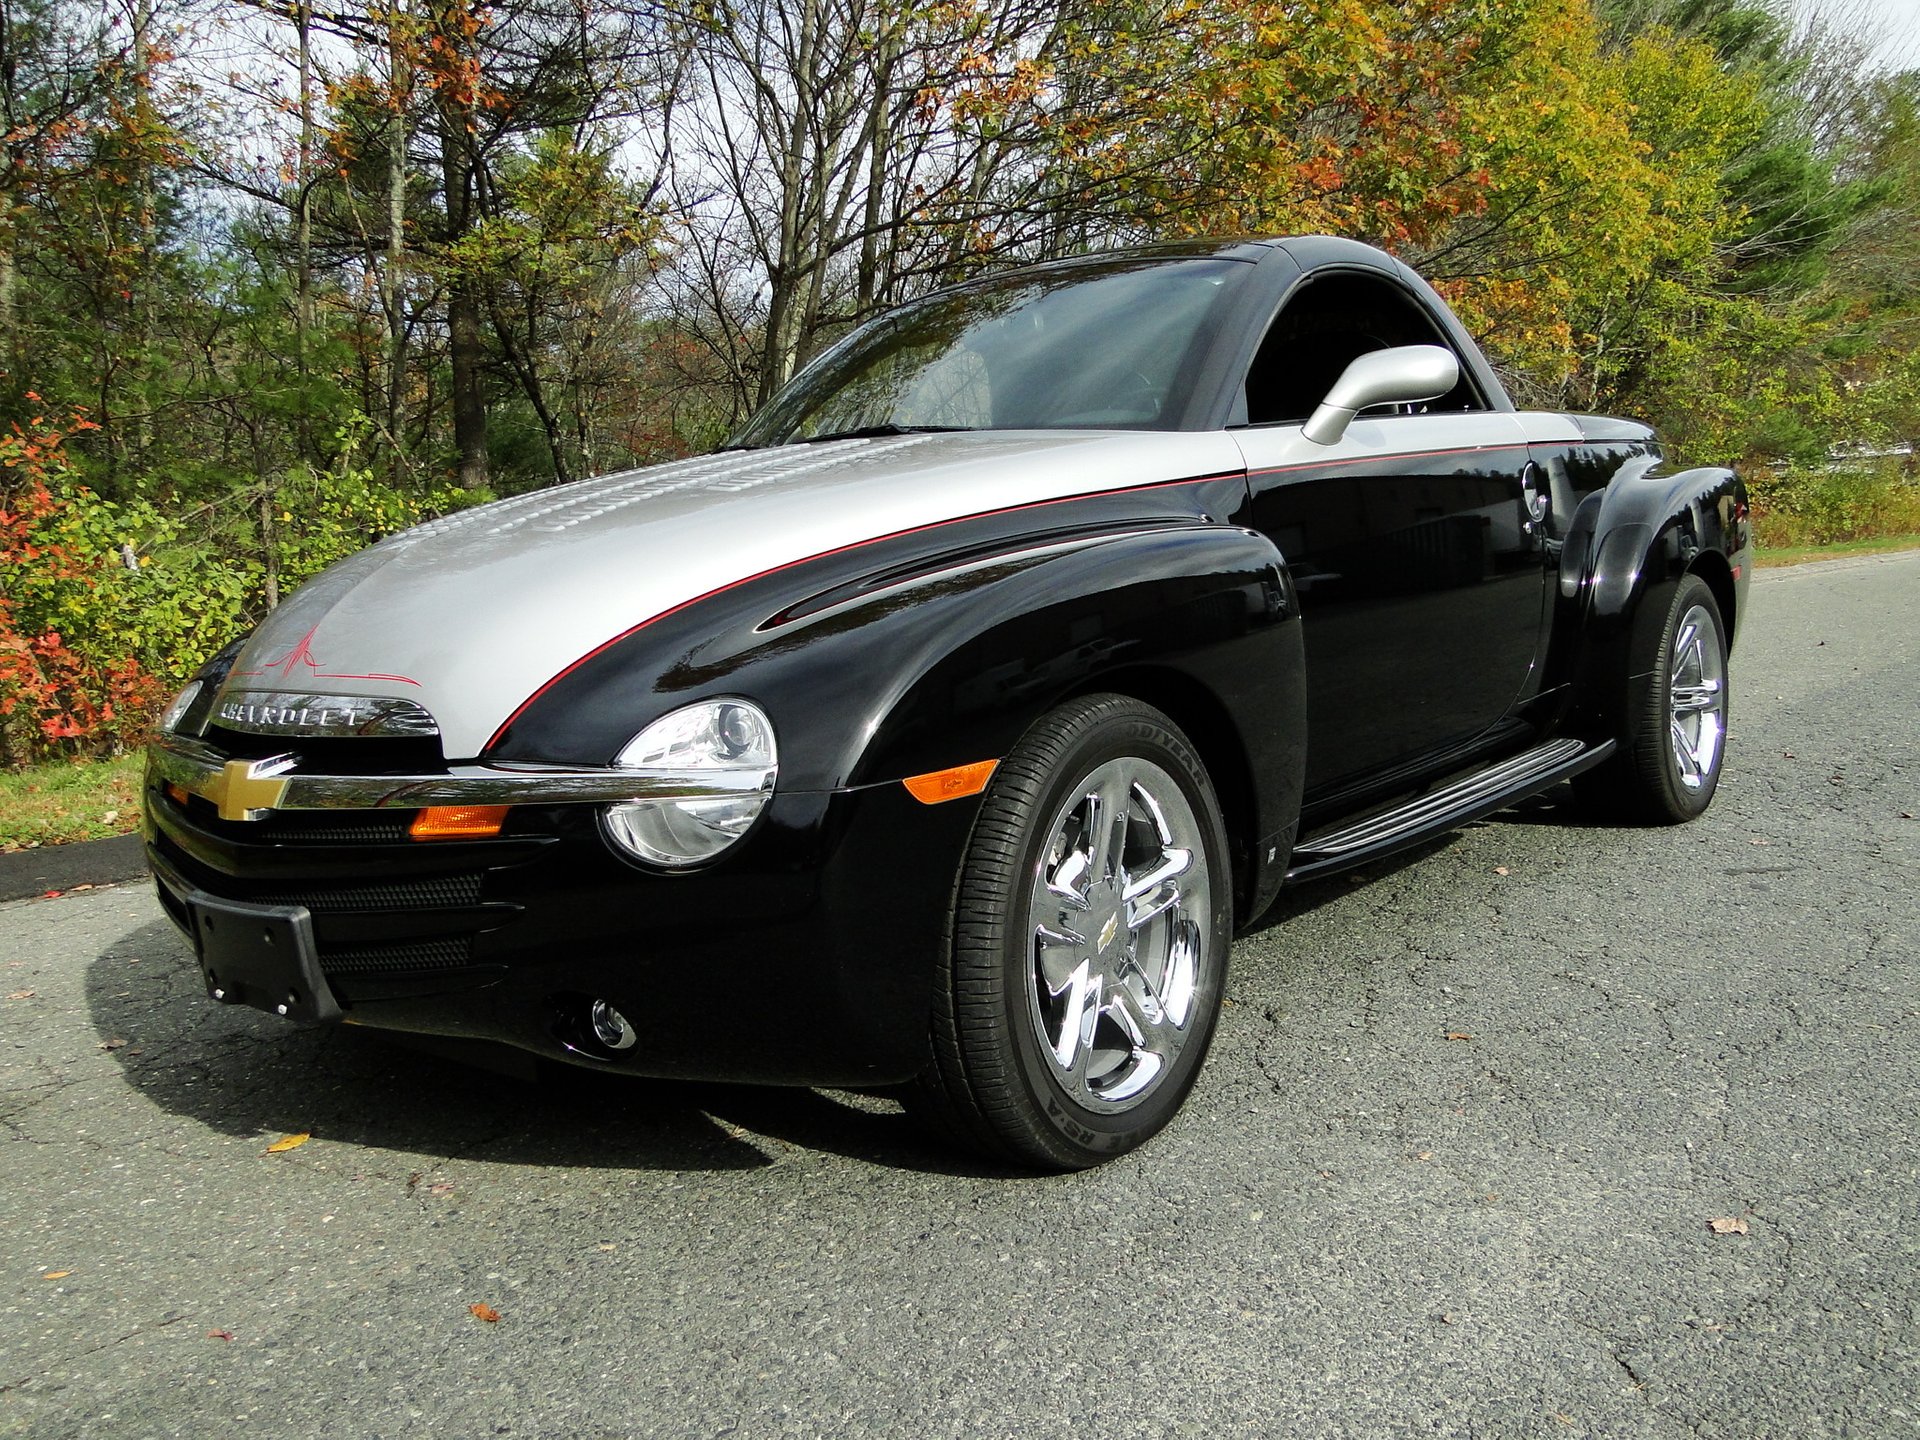 2006 Chevrolet SSR | Legendary Motors - Classic Cars, Muscle Cars, Hot Rods  & Antique Cars - Rowley, MA